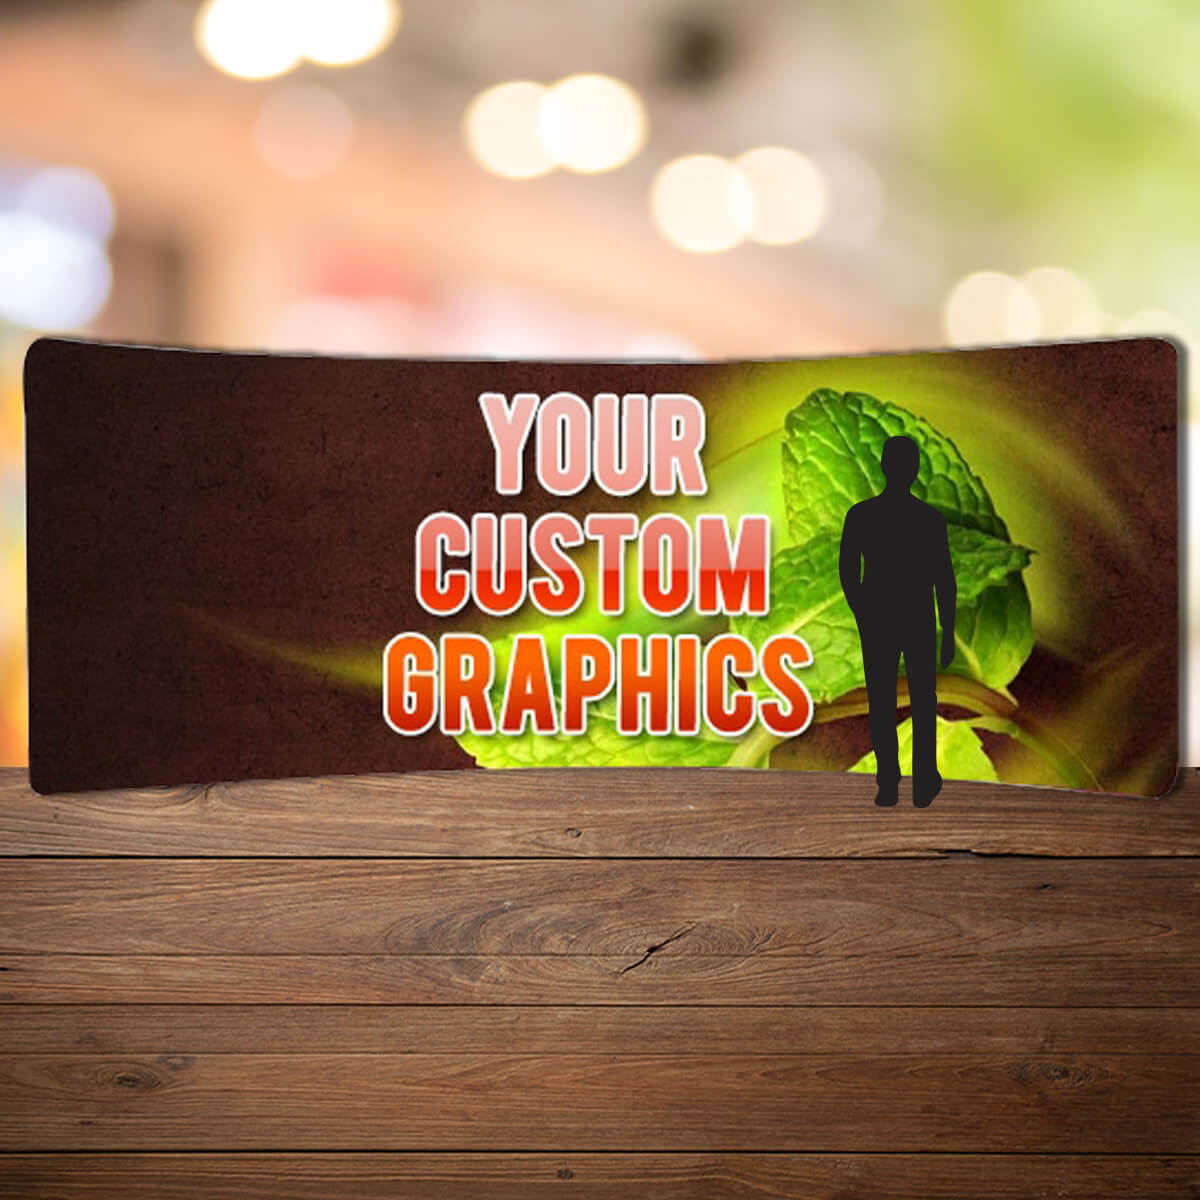 Large curved tension fabric display exhibit trade show by Curative Printing